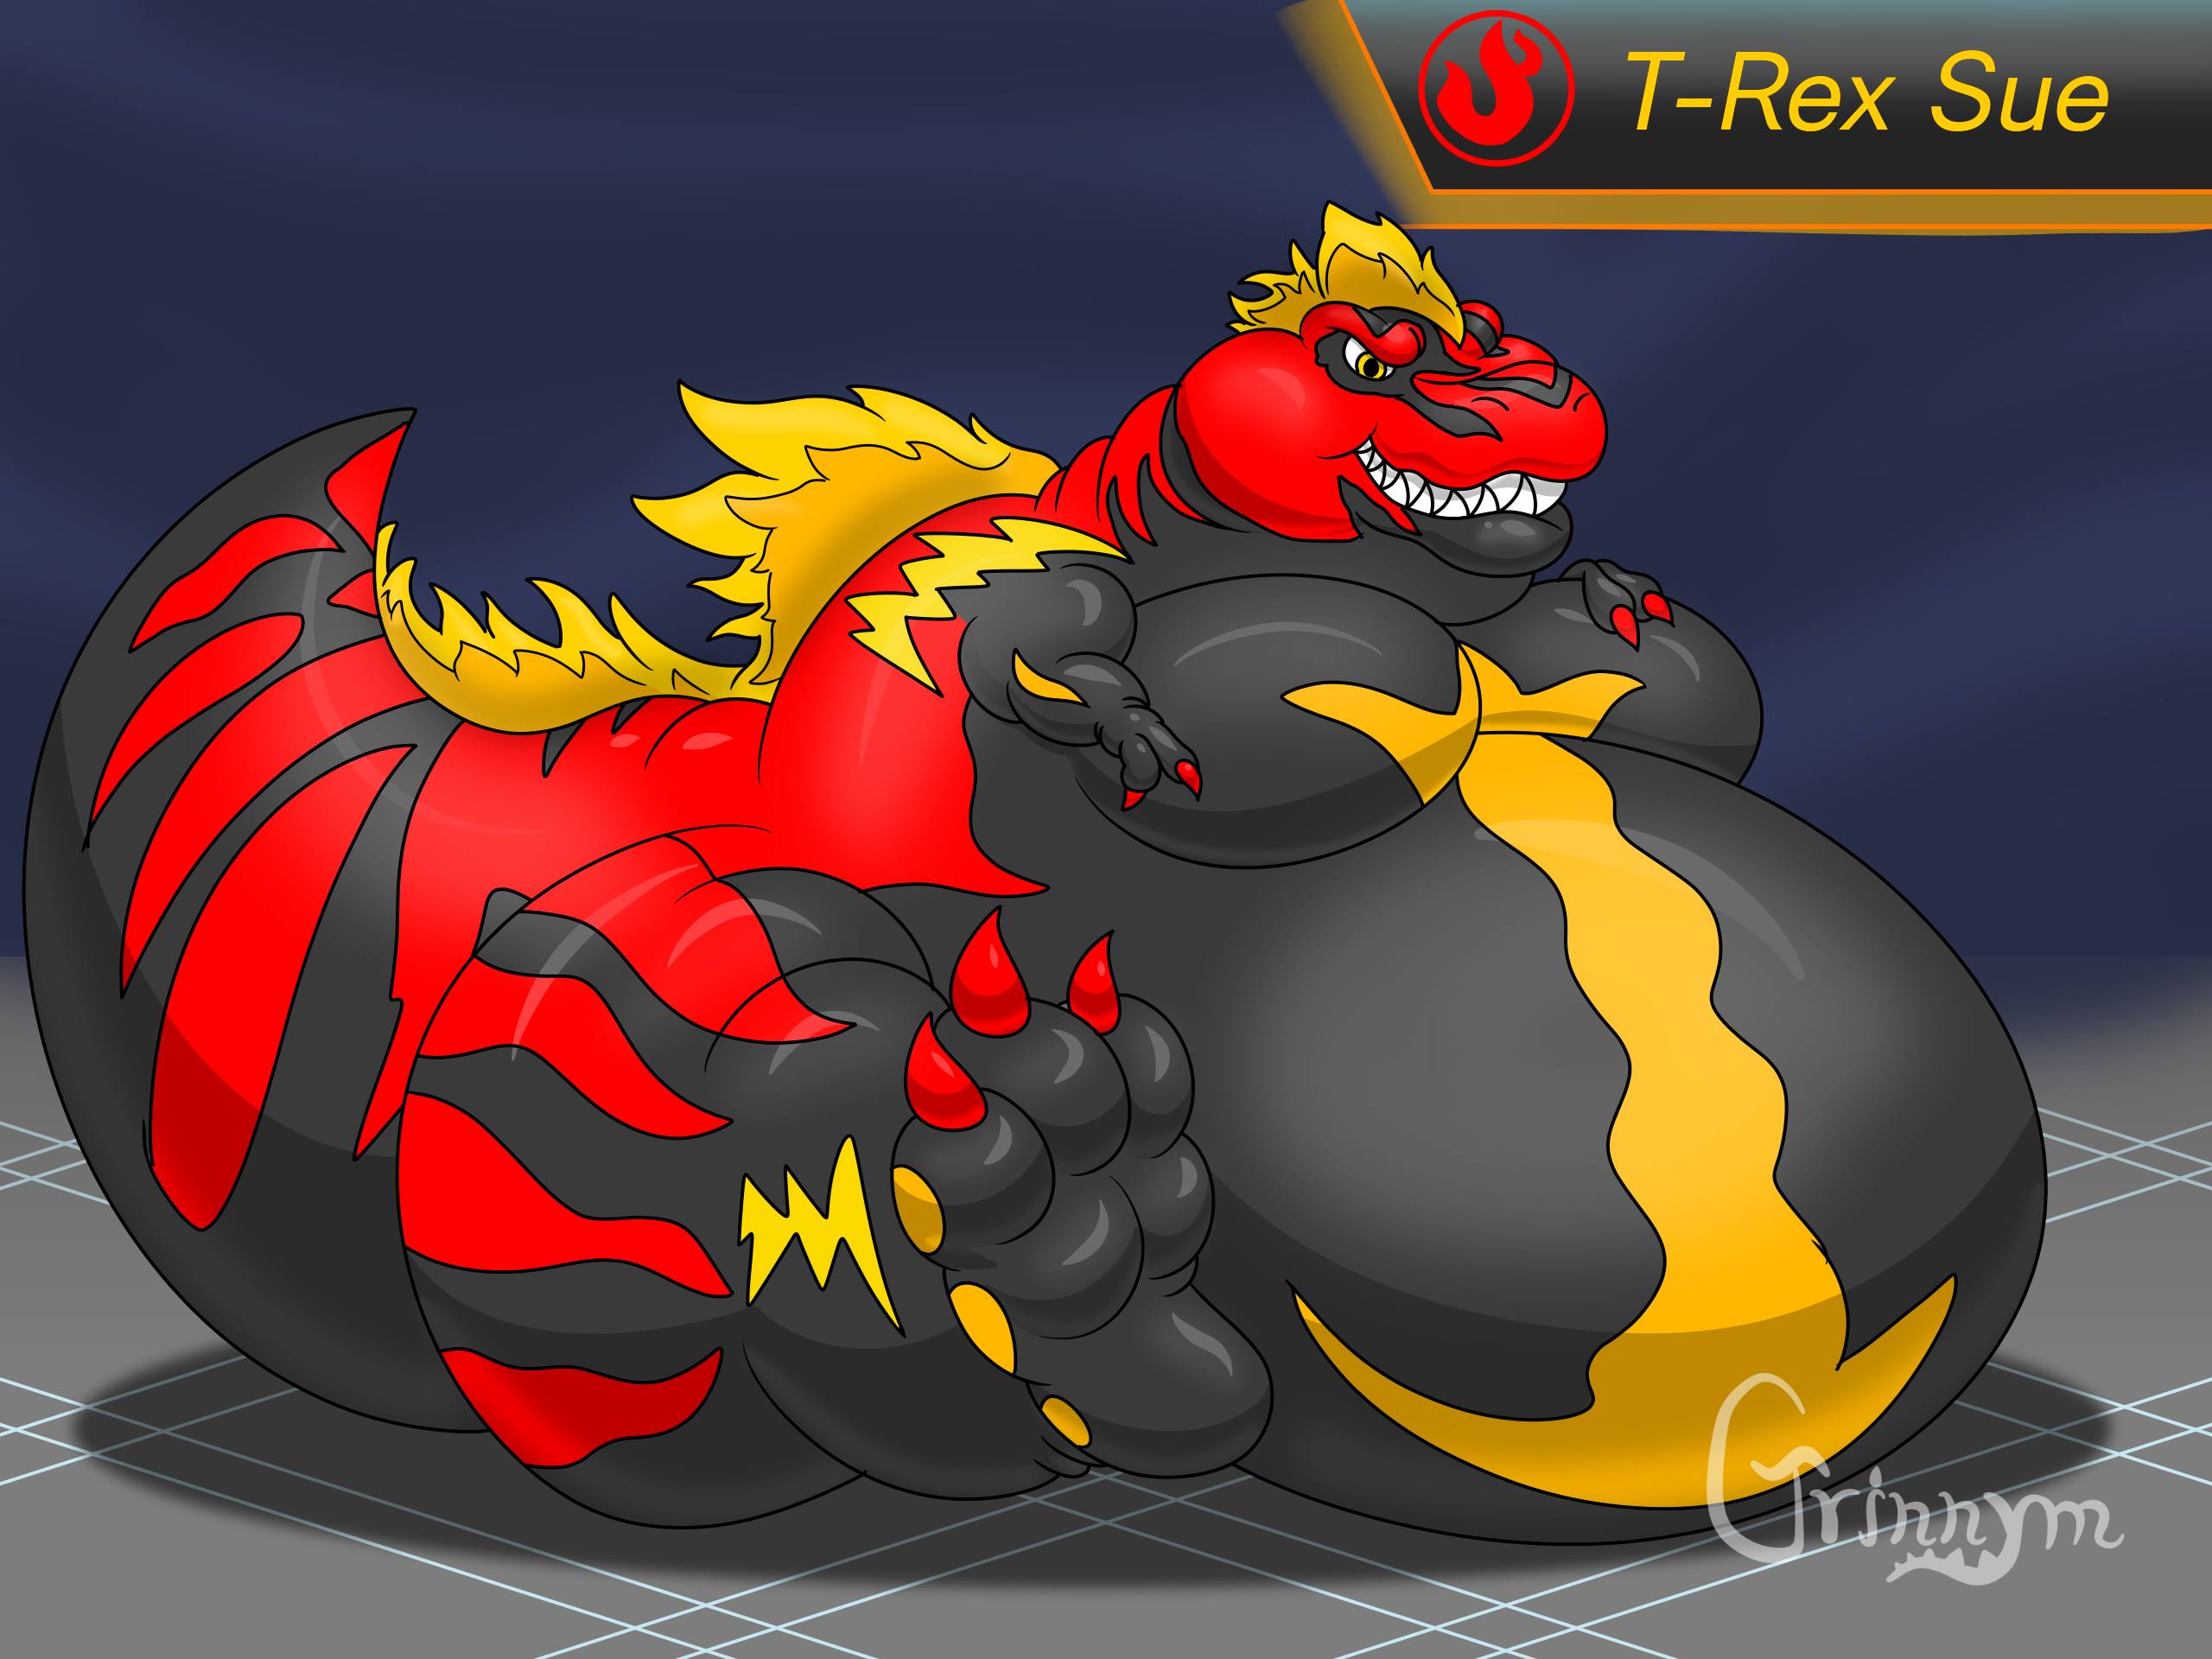 Fat Fossilary: T-Rex Sue by Grinnym -- Fur Affinity [dot] net